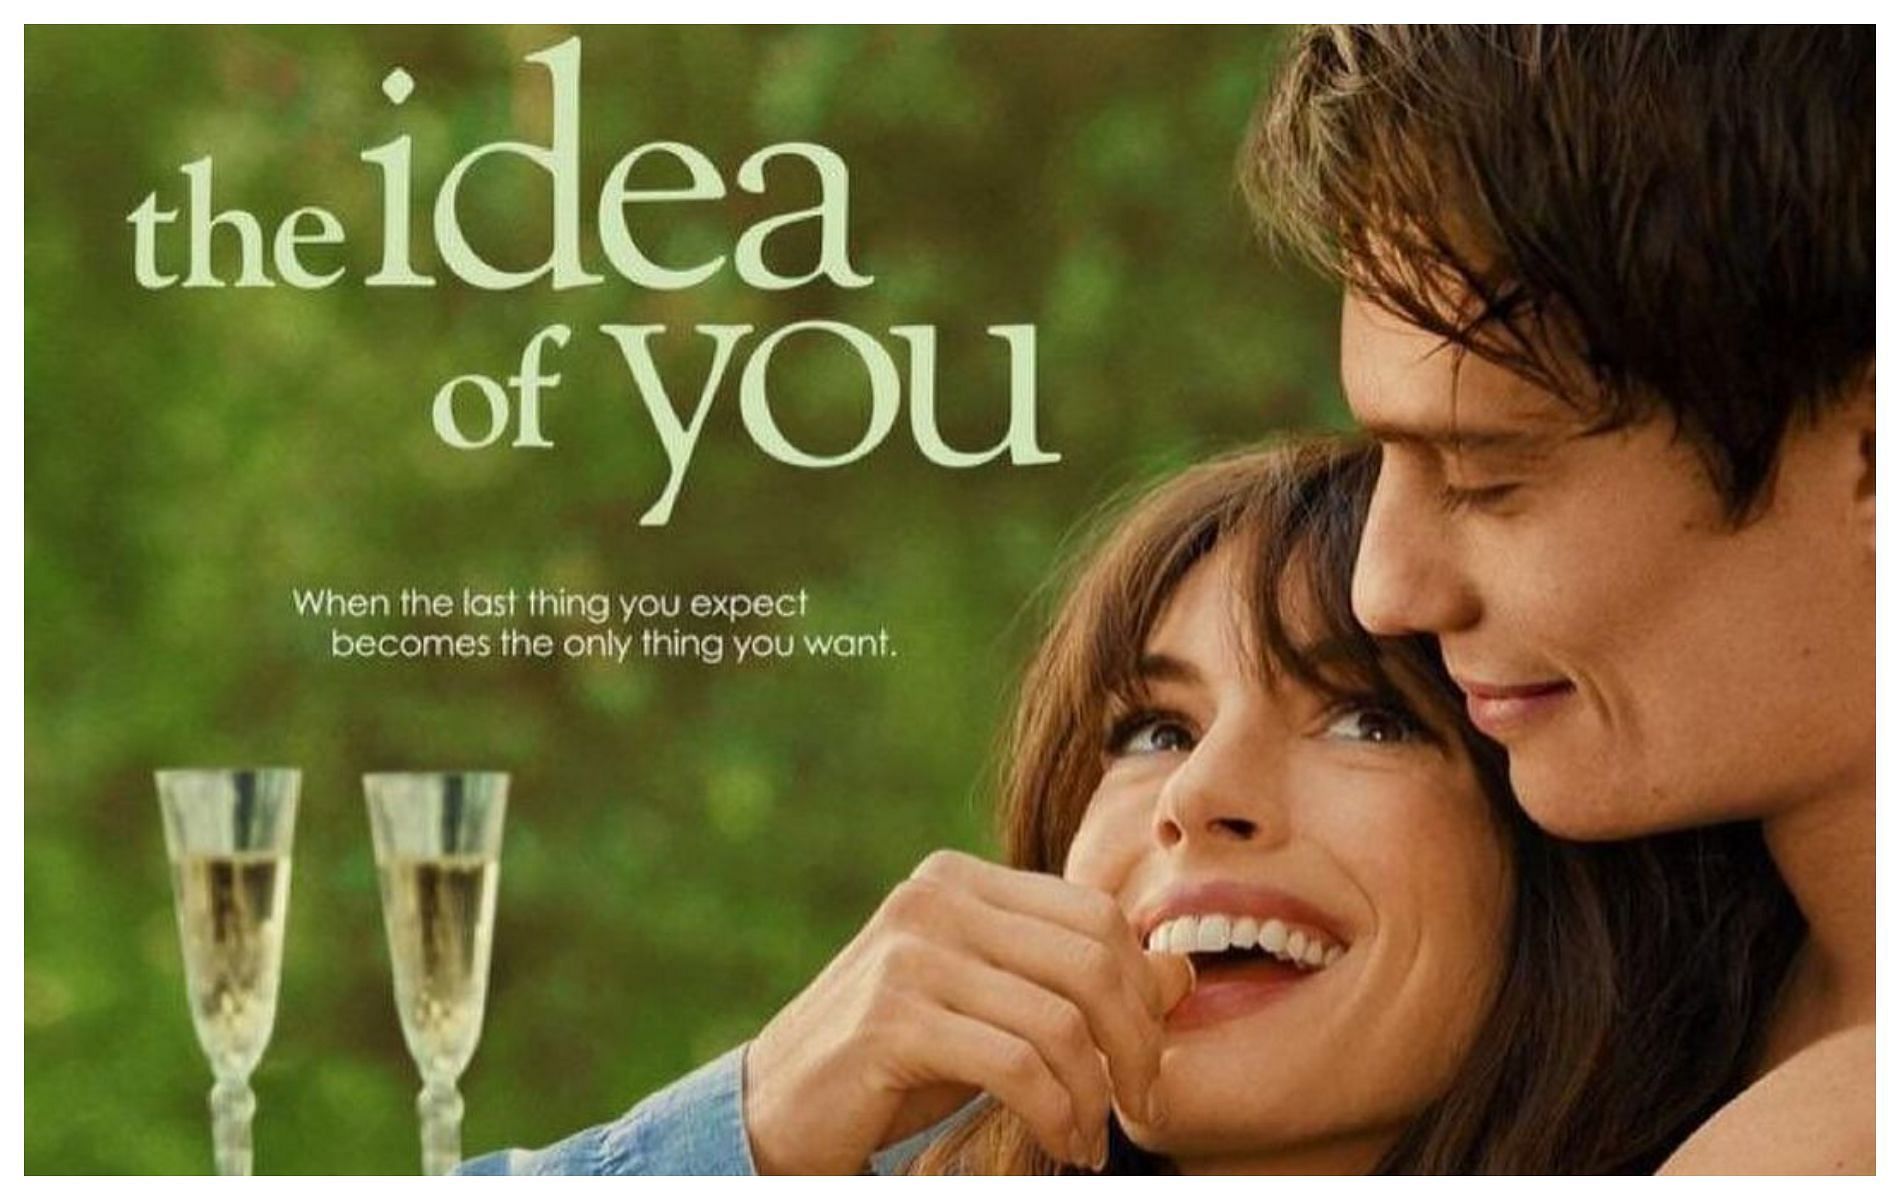 The Idea of You will release on May 2. (Image via The Idea of You, Instagram)